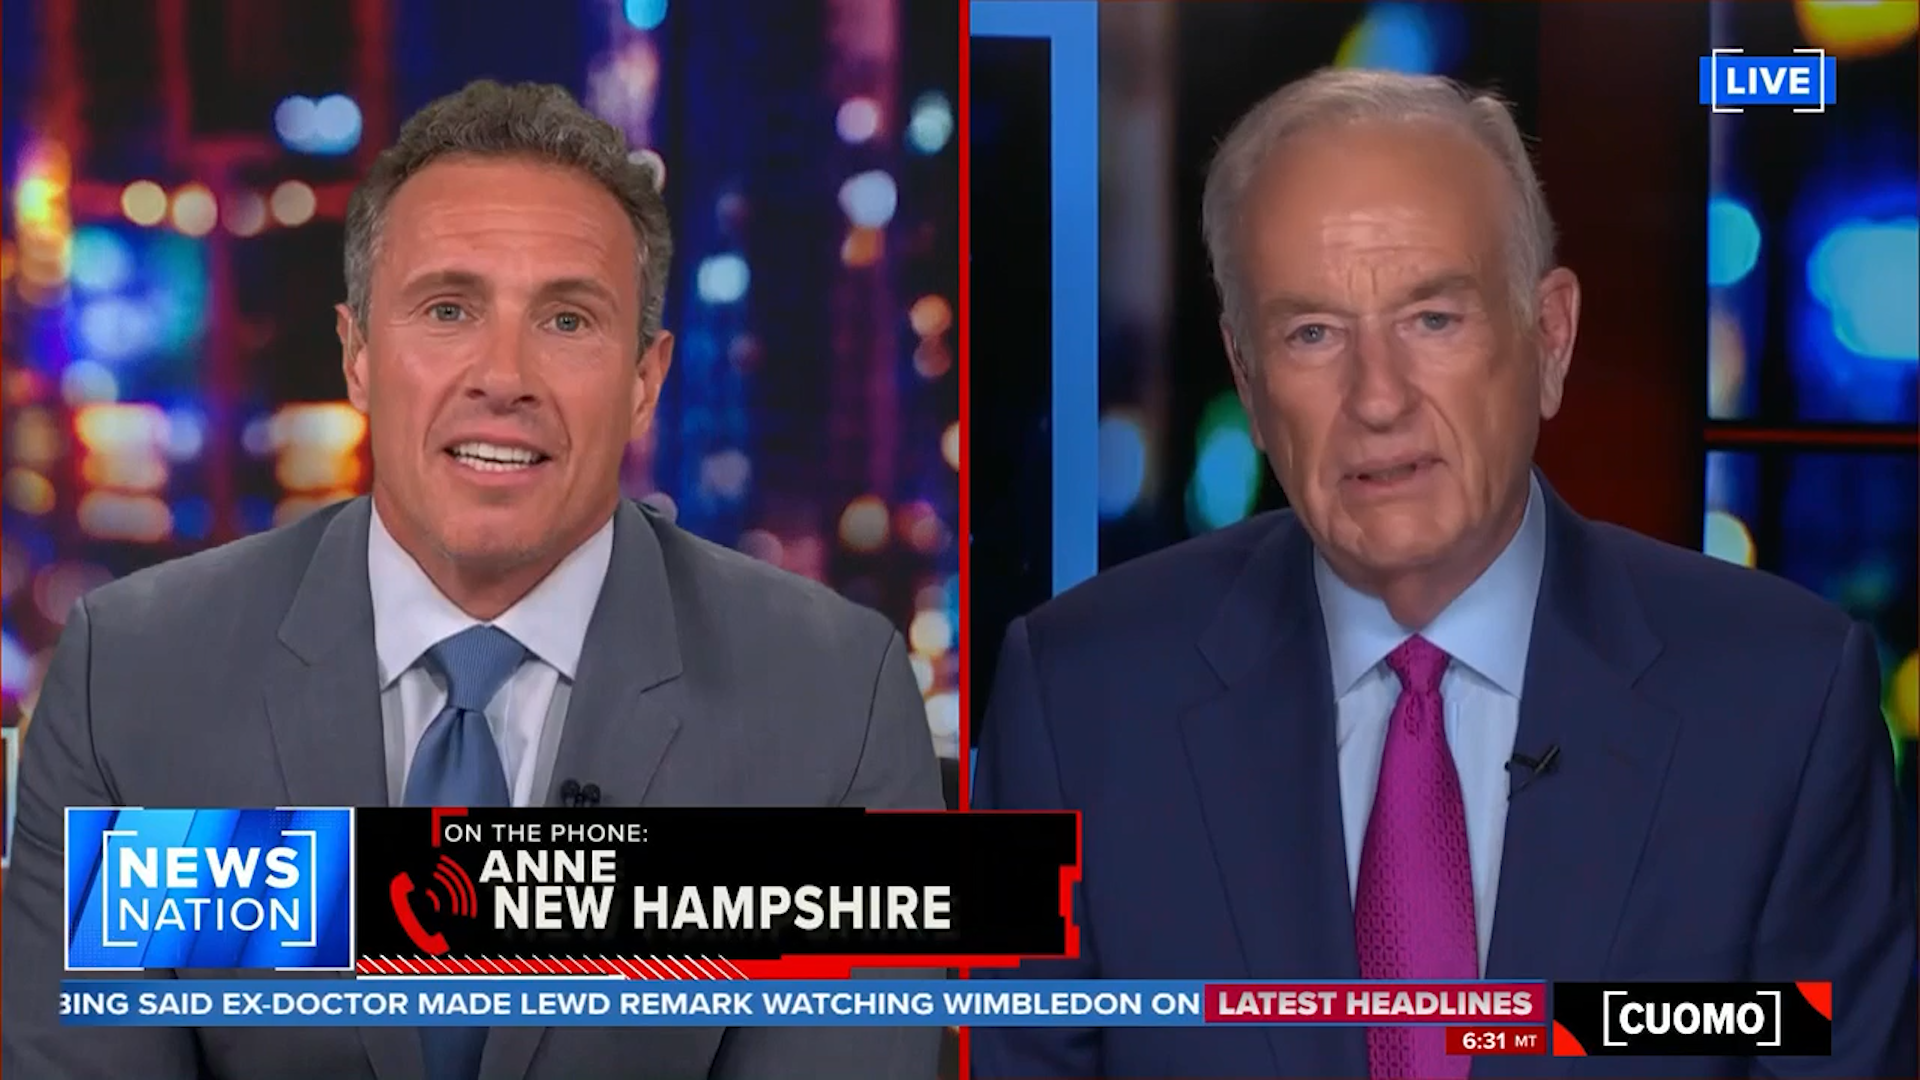 NewsNation: Anne From New Hampshire Challenges O'Reilly on 'CUOMO'